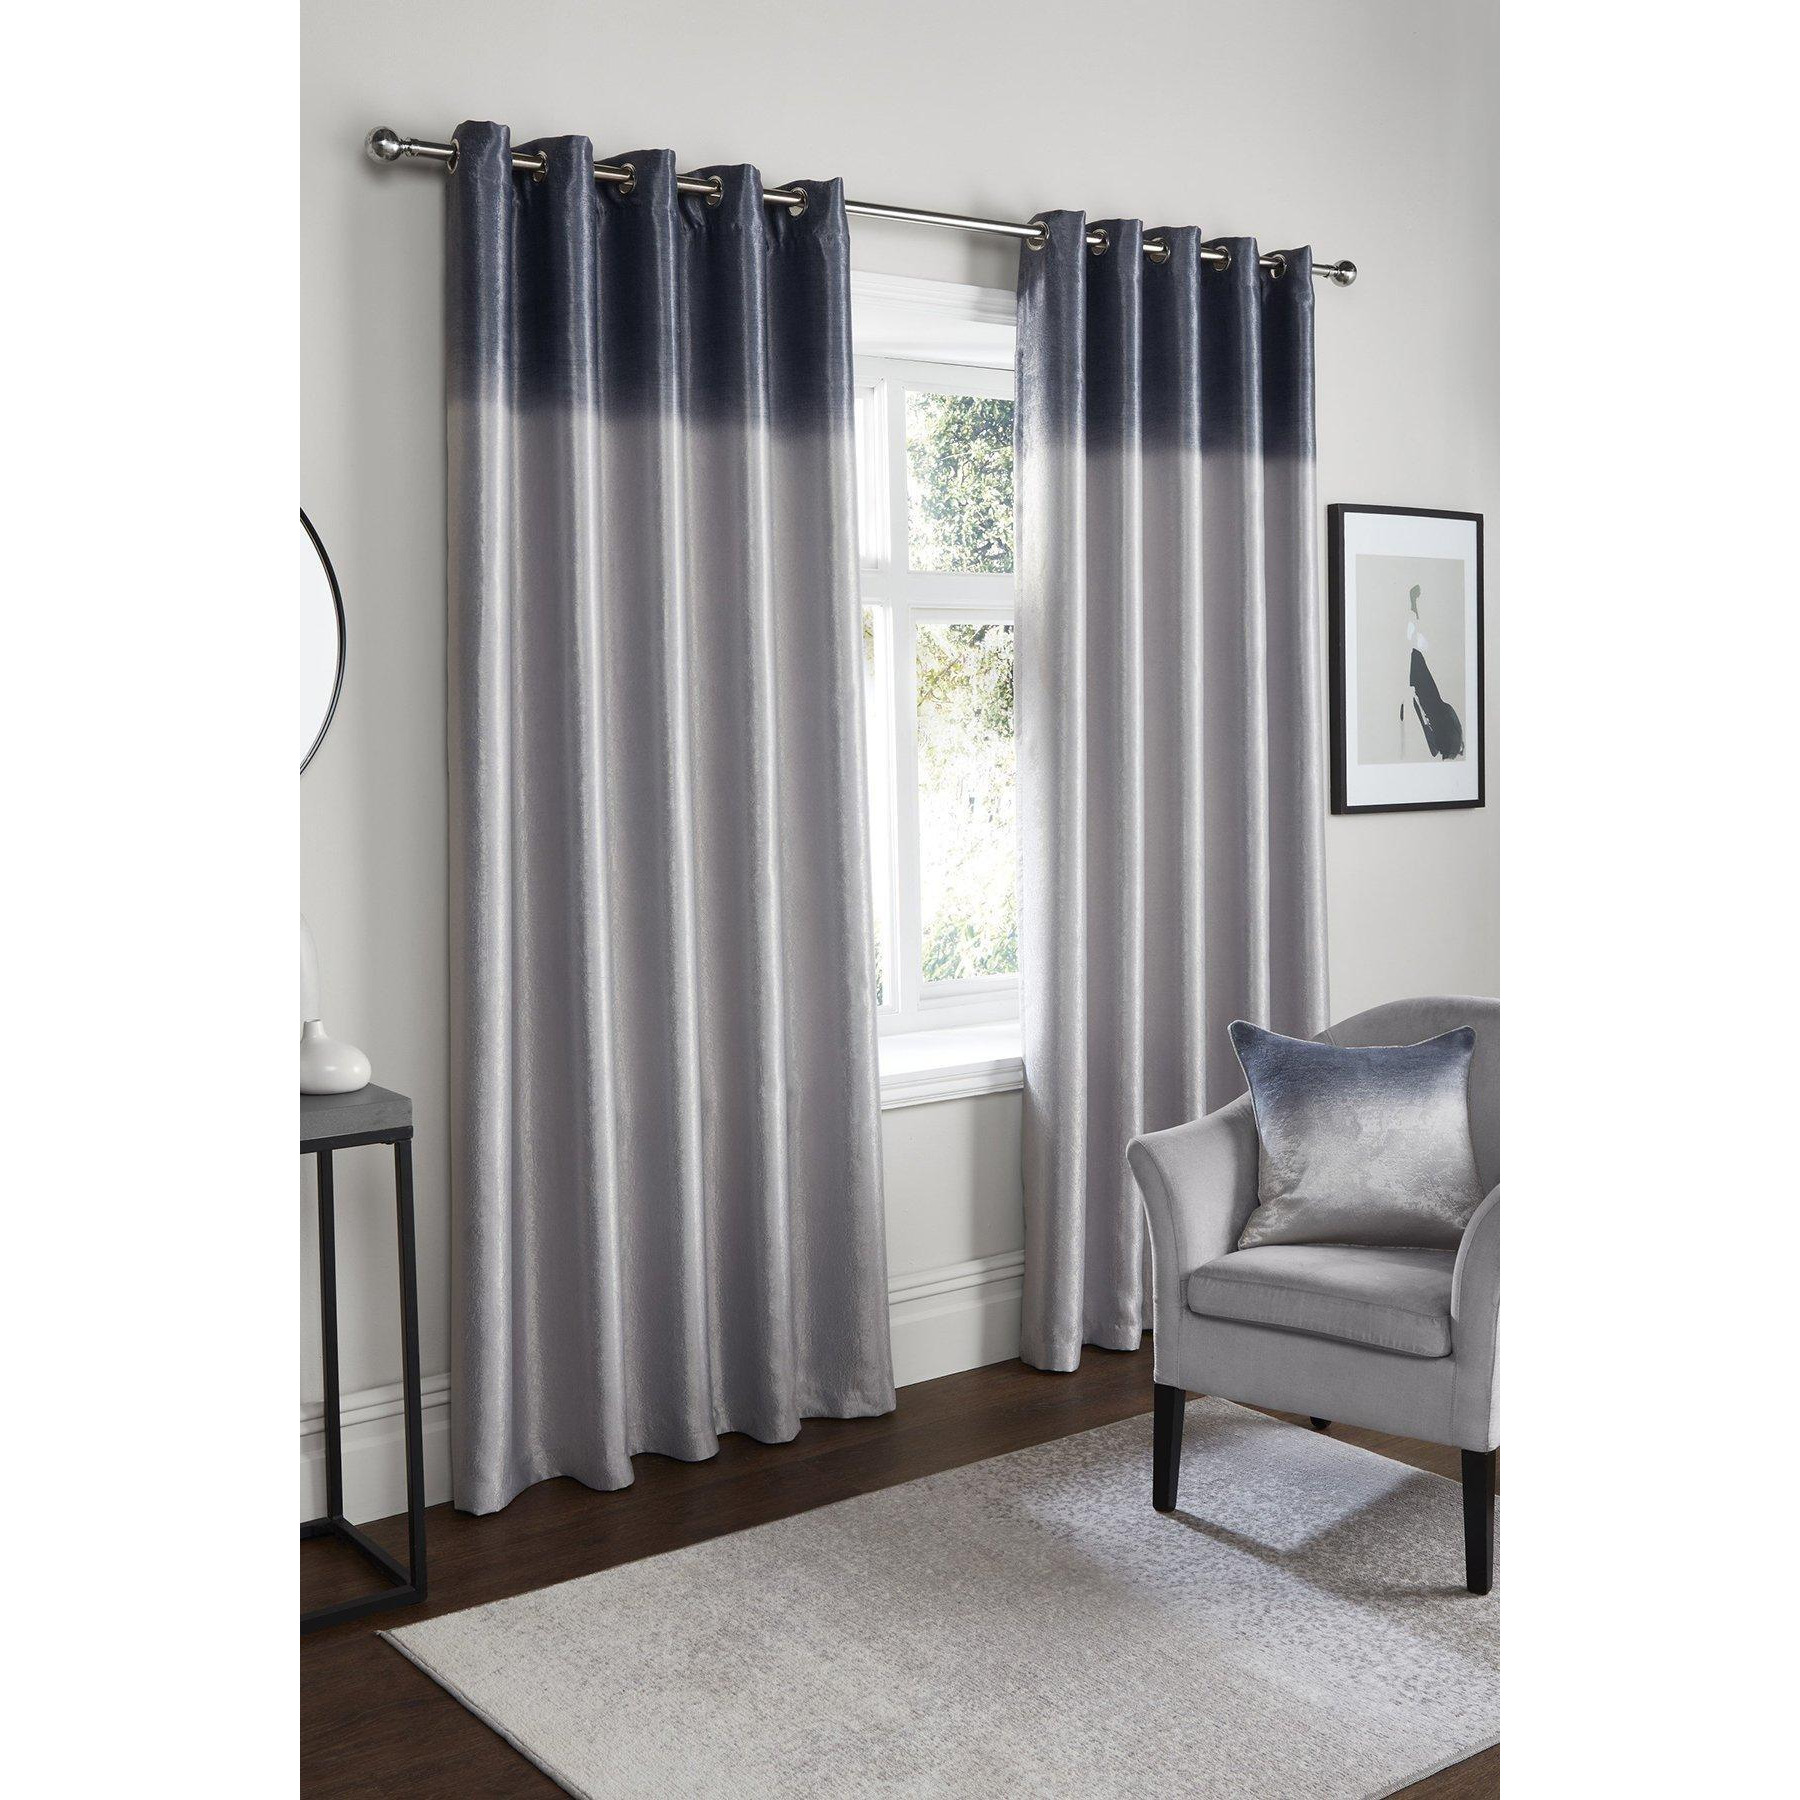 'Ombre Strata' Dim Out Pair of Eyelet Curtains - image 1